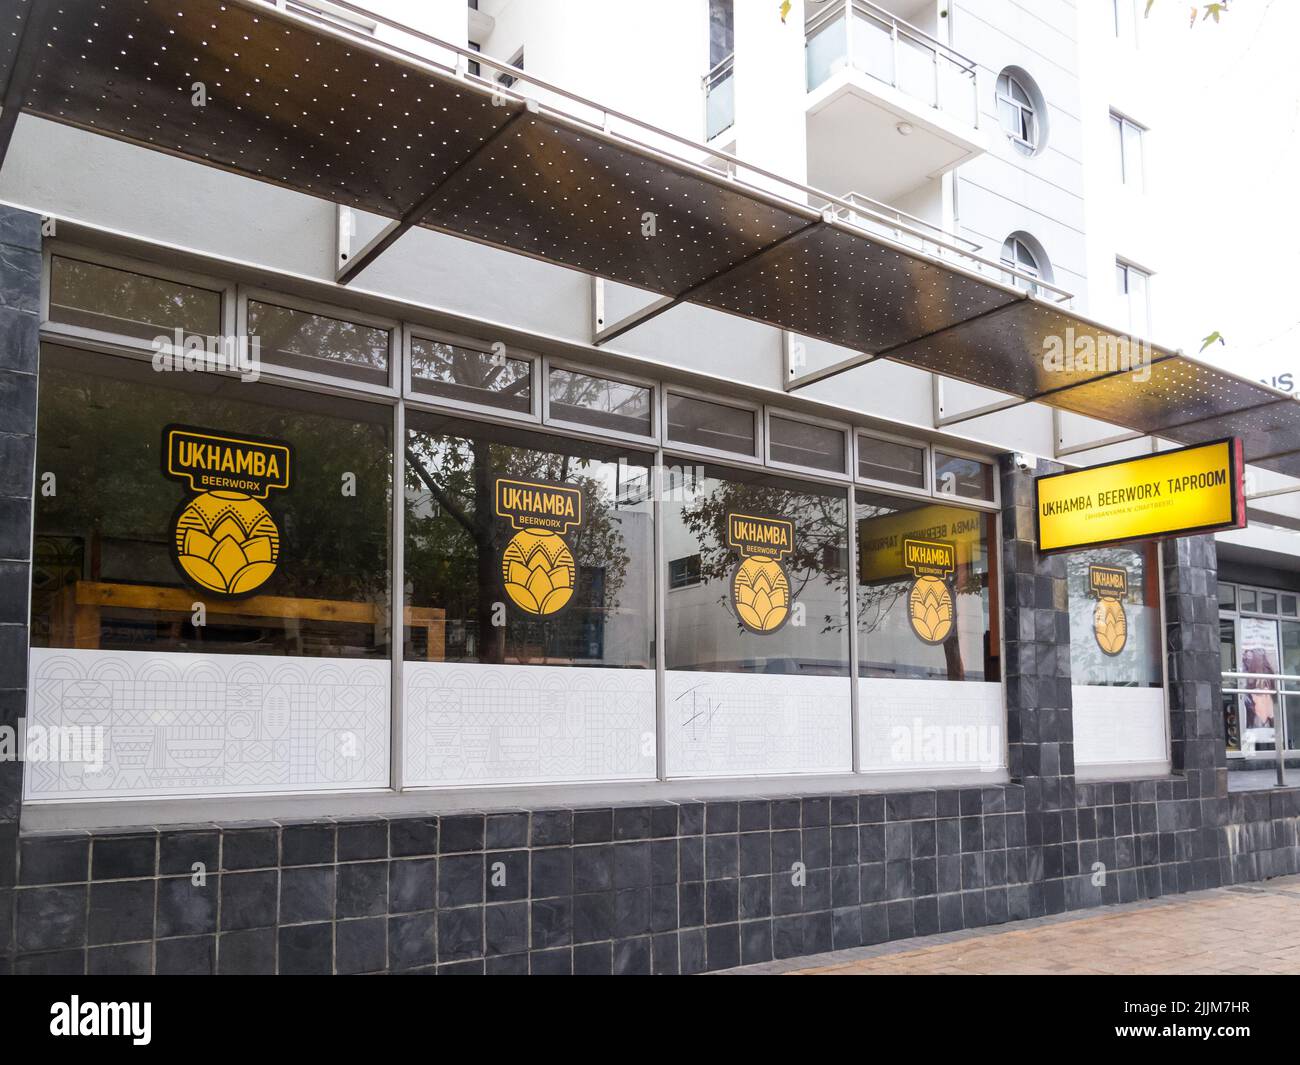 Ukhamba Beerworx taproom shop or storefront which sells local brewed beer in Cape Town, South Africa Stock Photo